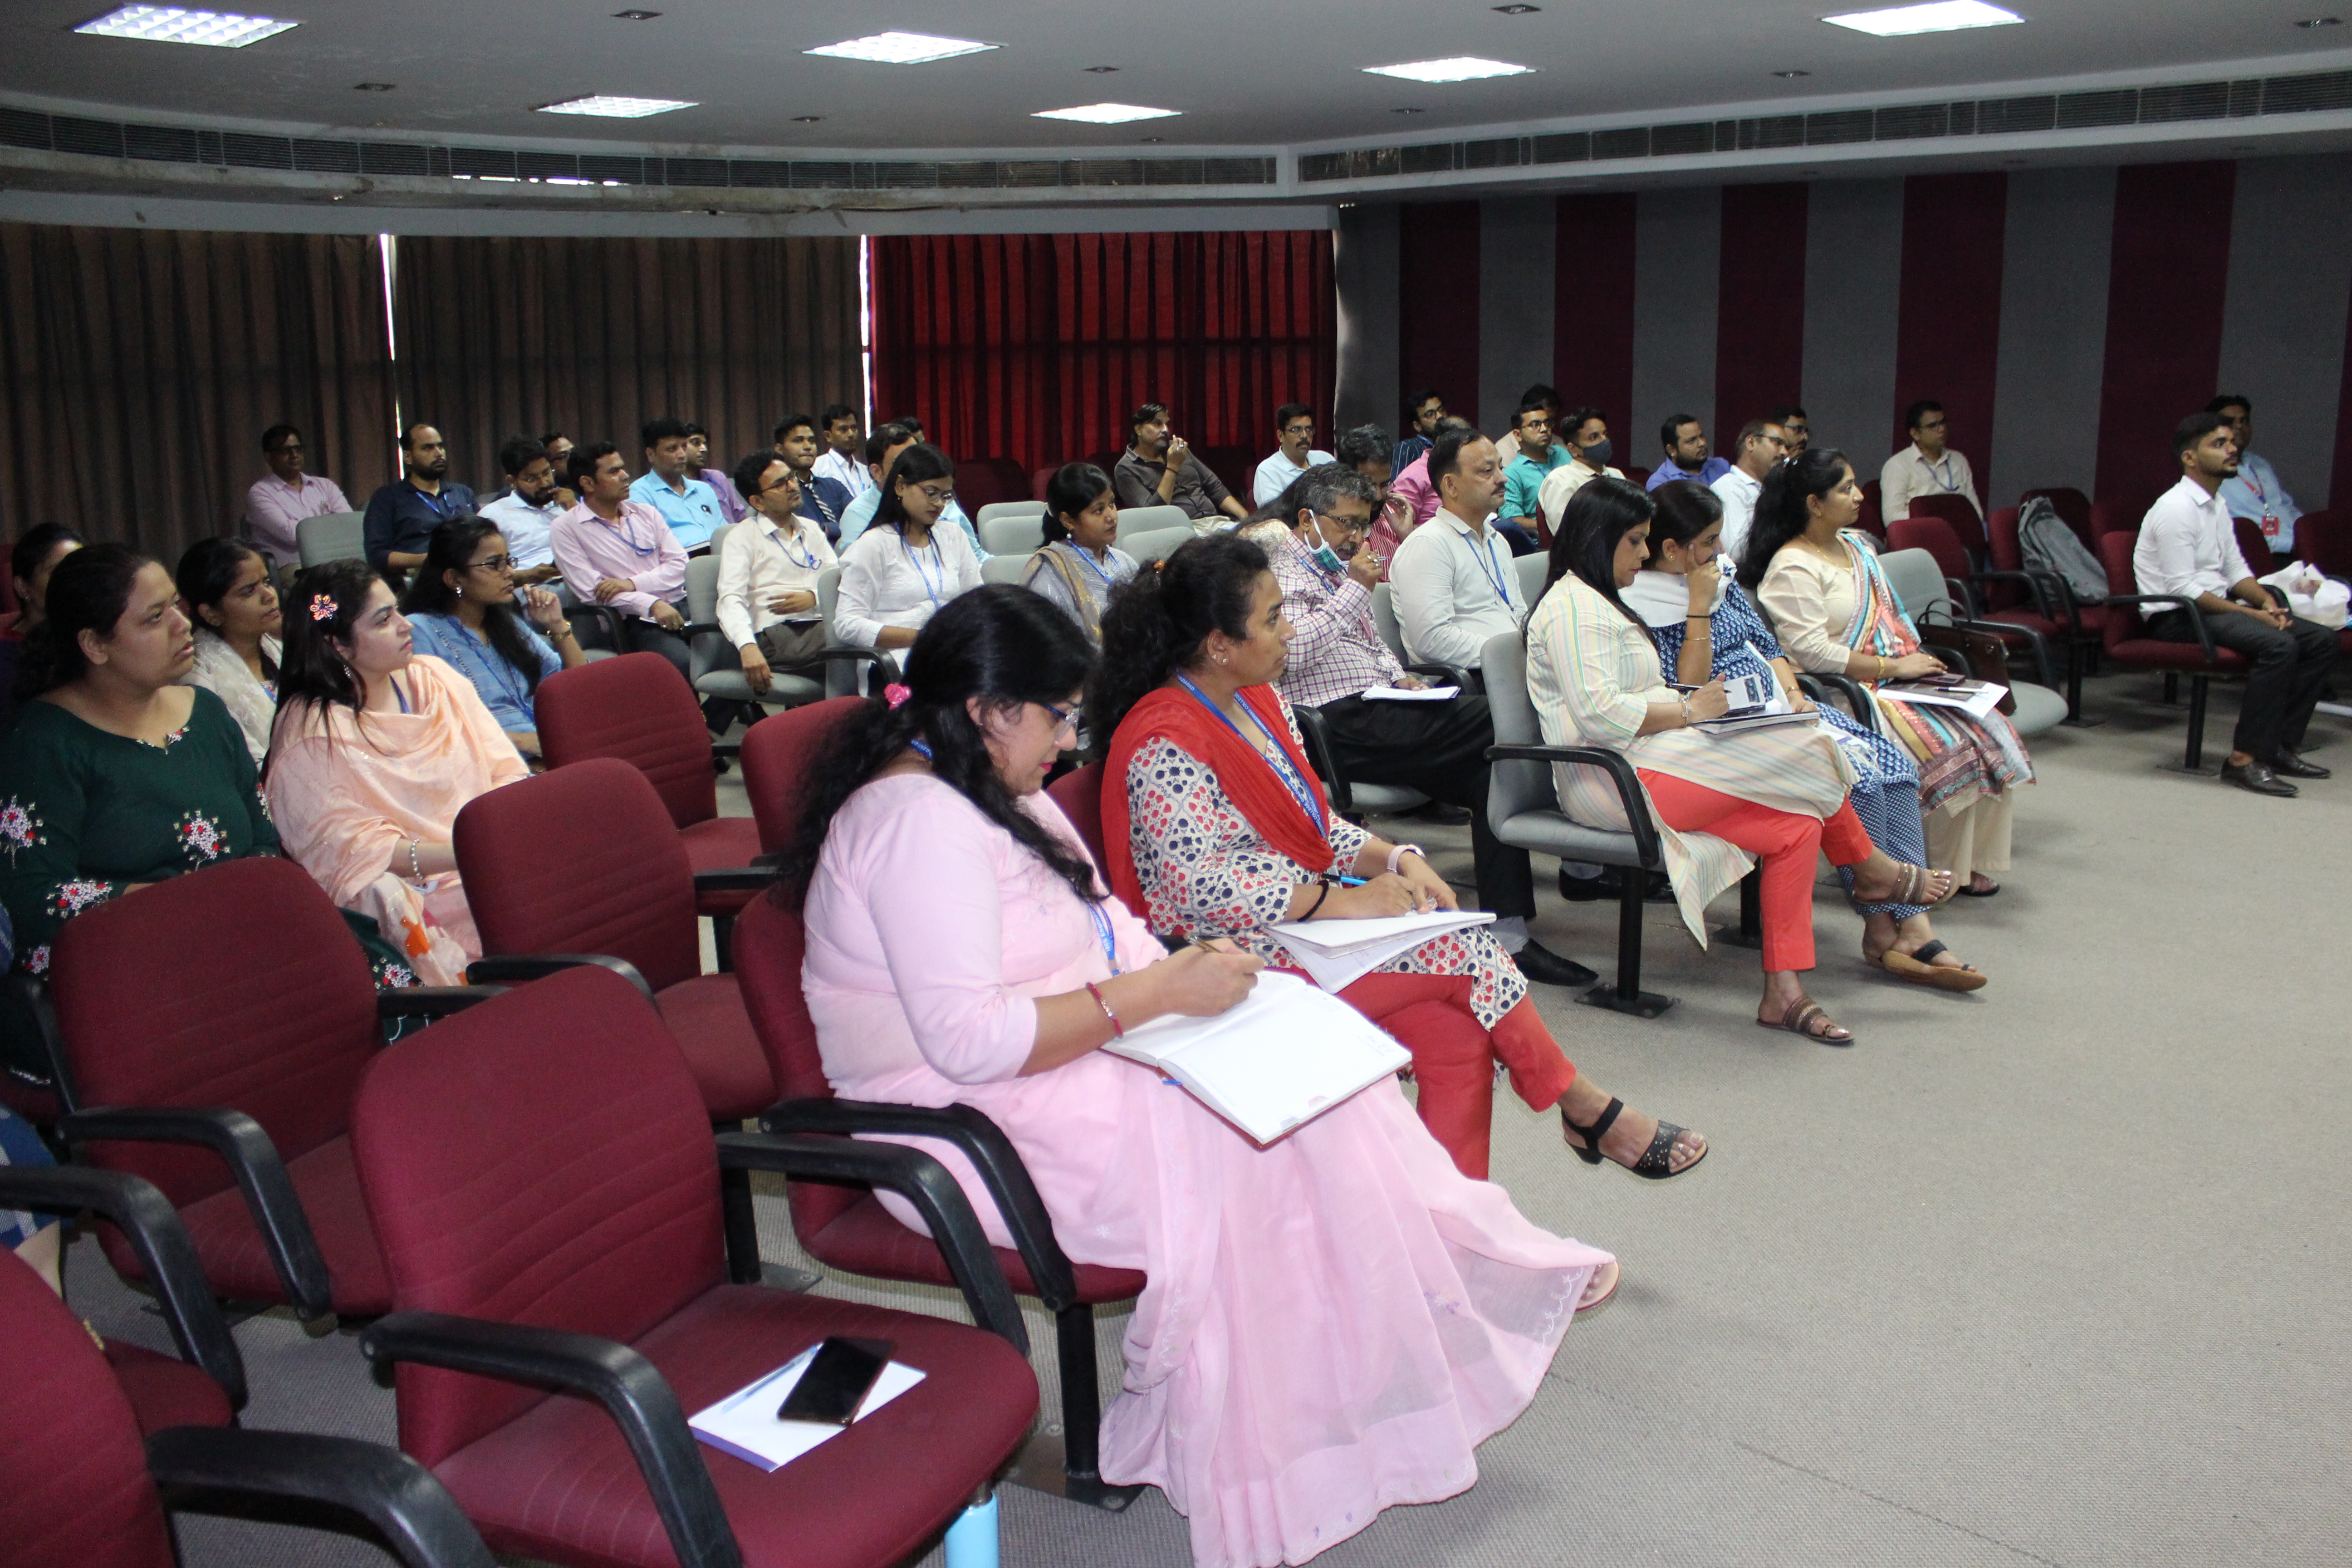 Seminar on Experiential & Innovative Method of Learning